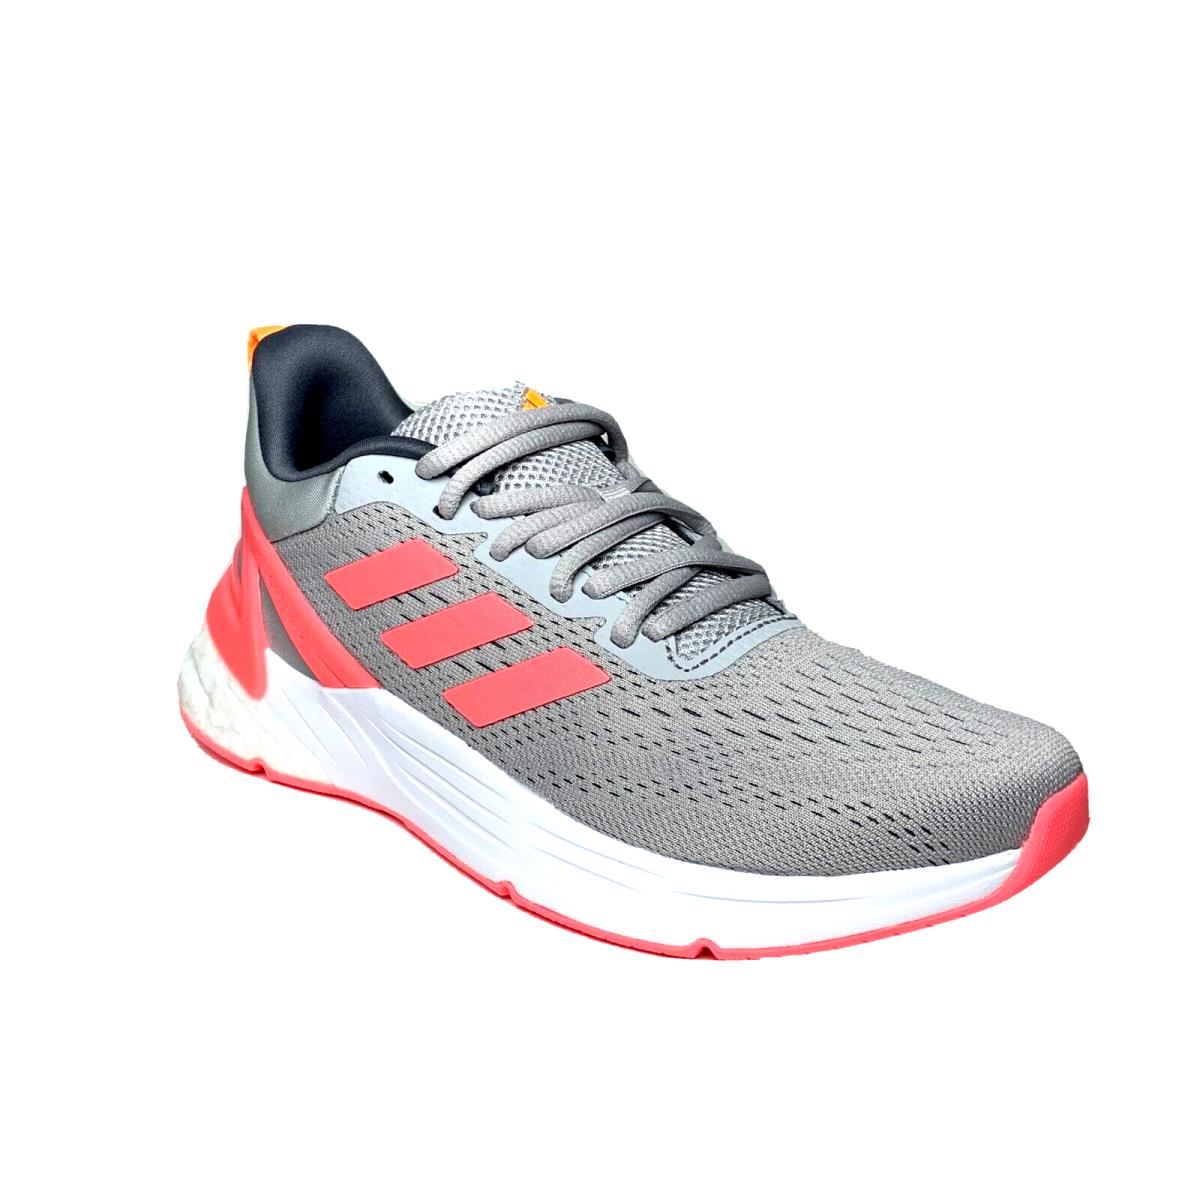 Adidas Womens Response Super 2 Unisex Athletic Shoes Running Sneakers Grey/pink - Grey/Pink